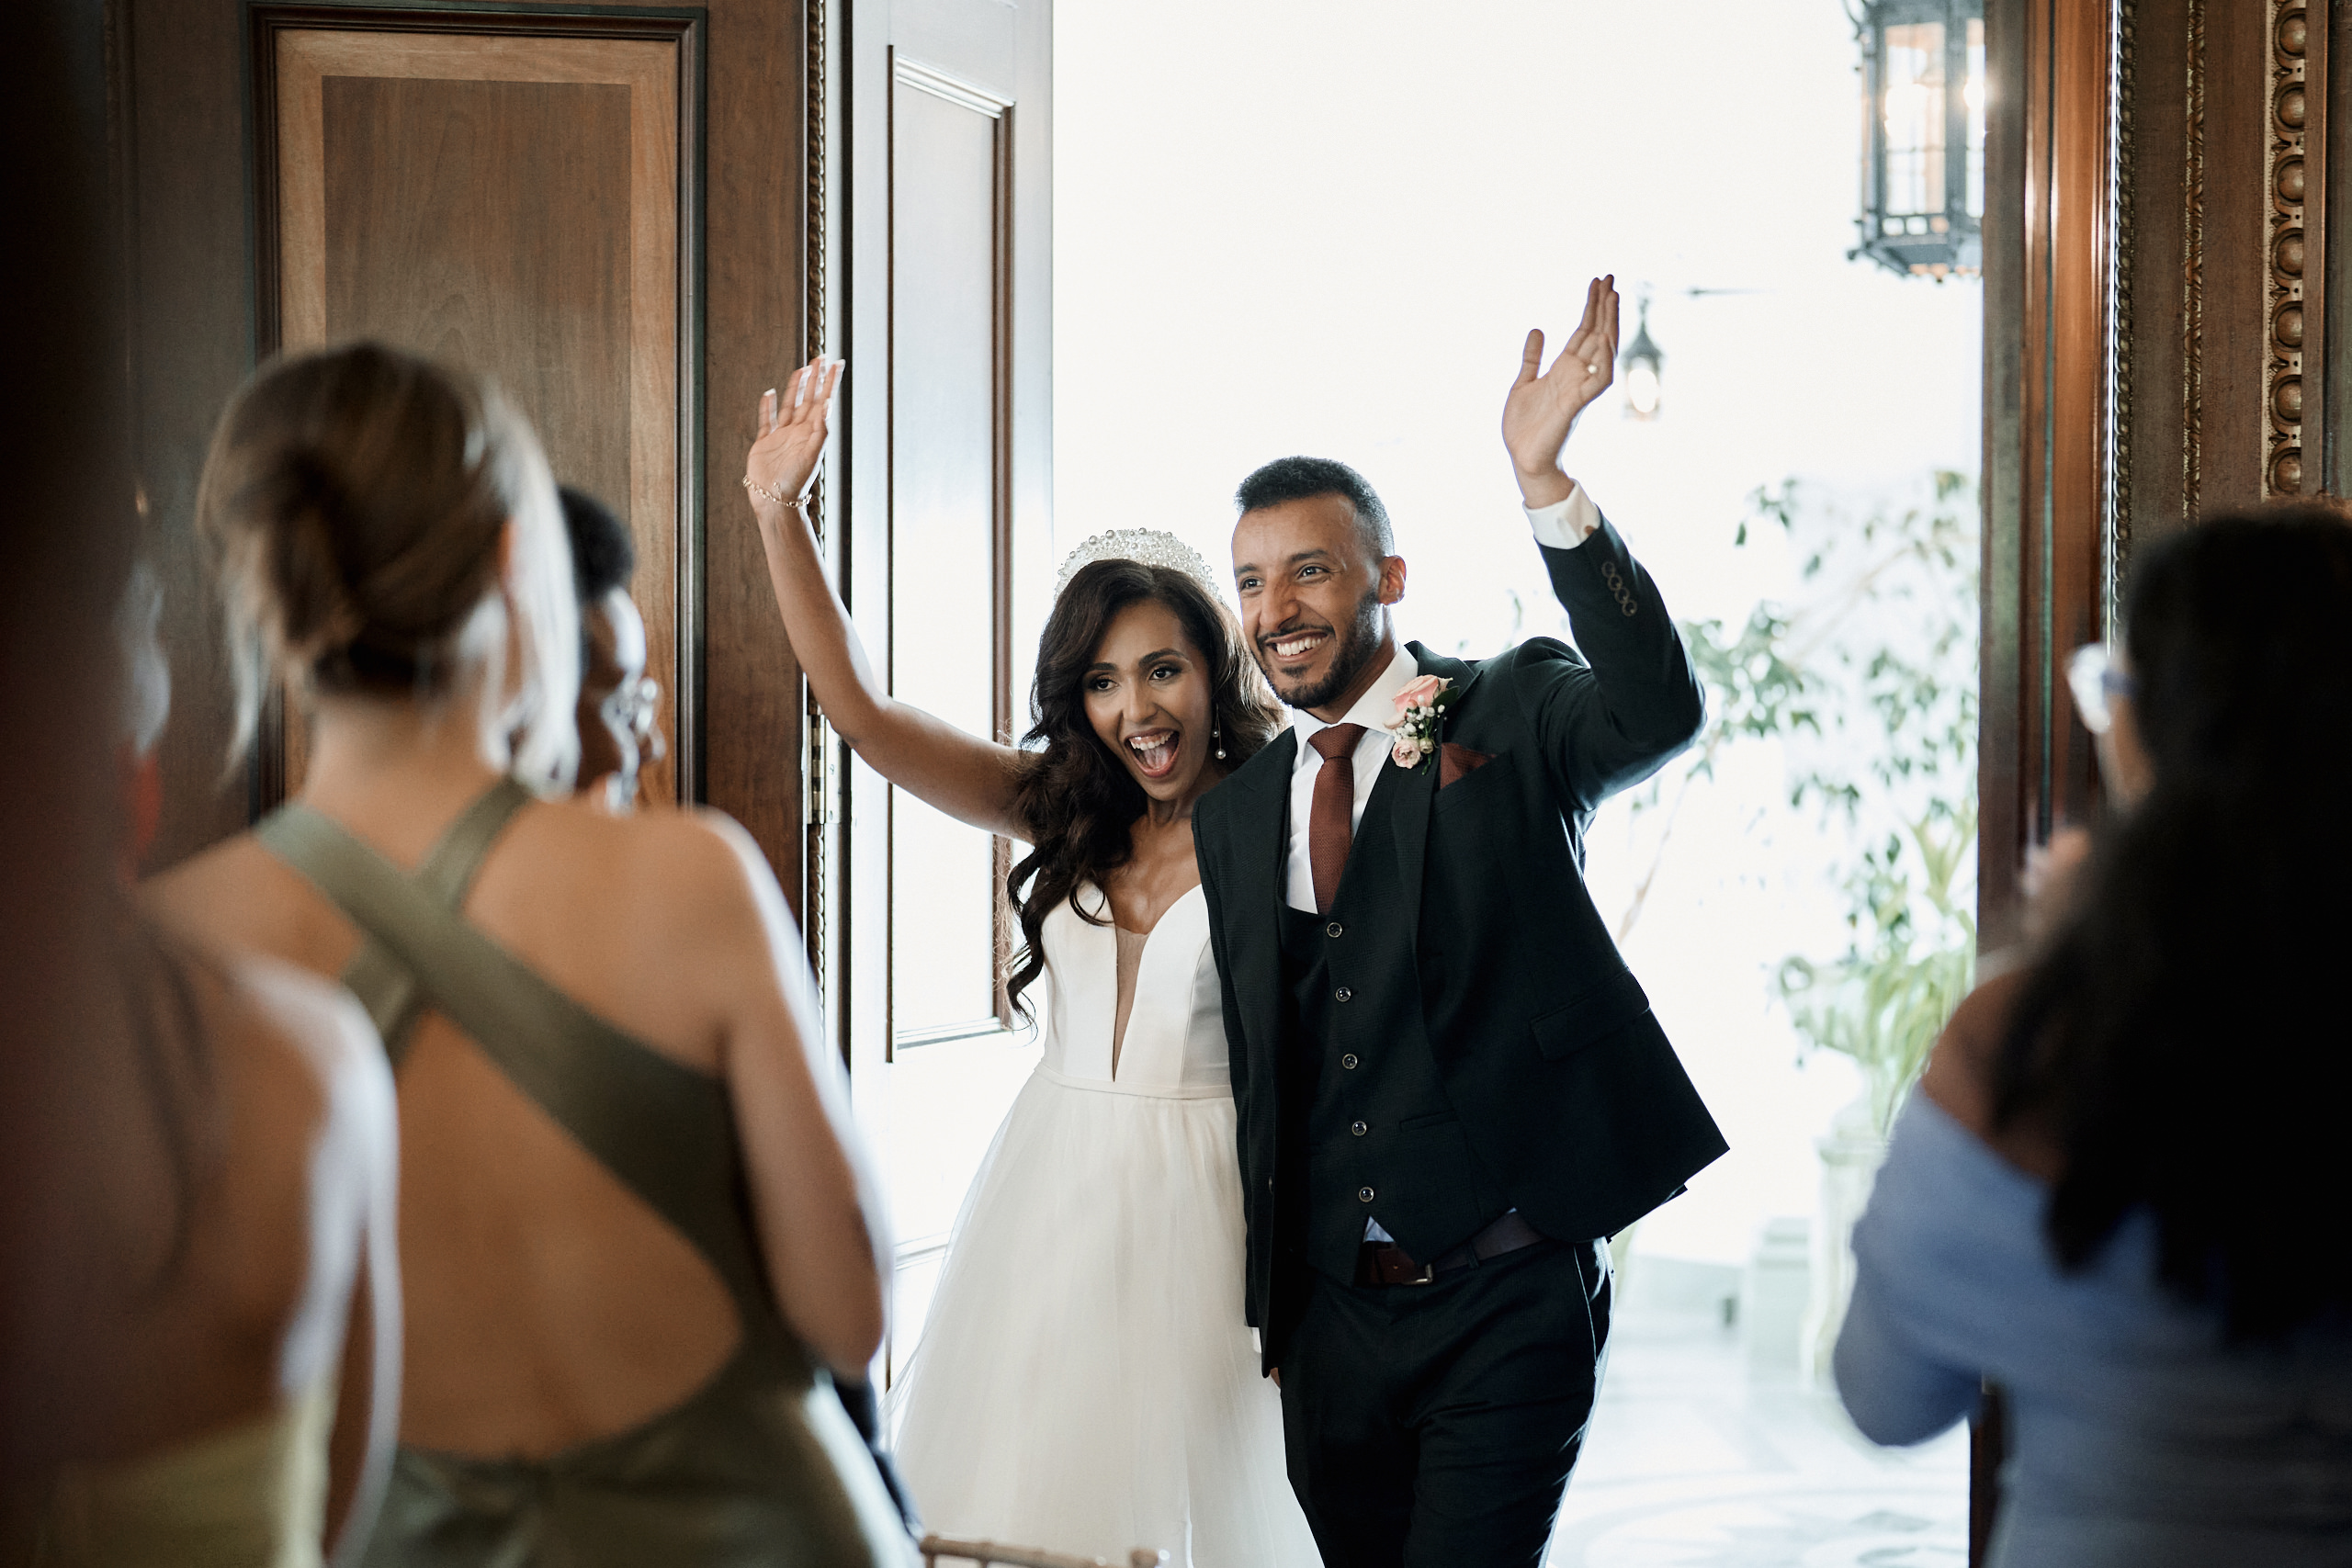 A couple getting married is waving from a room's entrance.